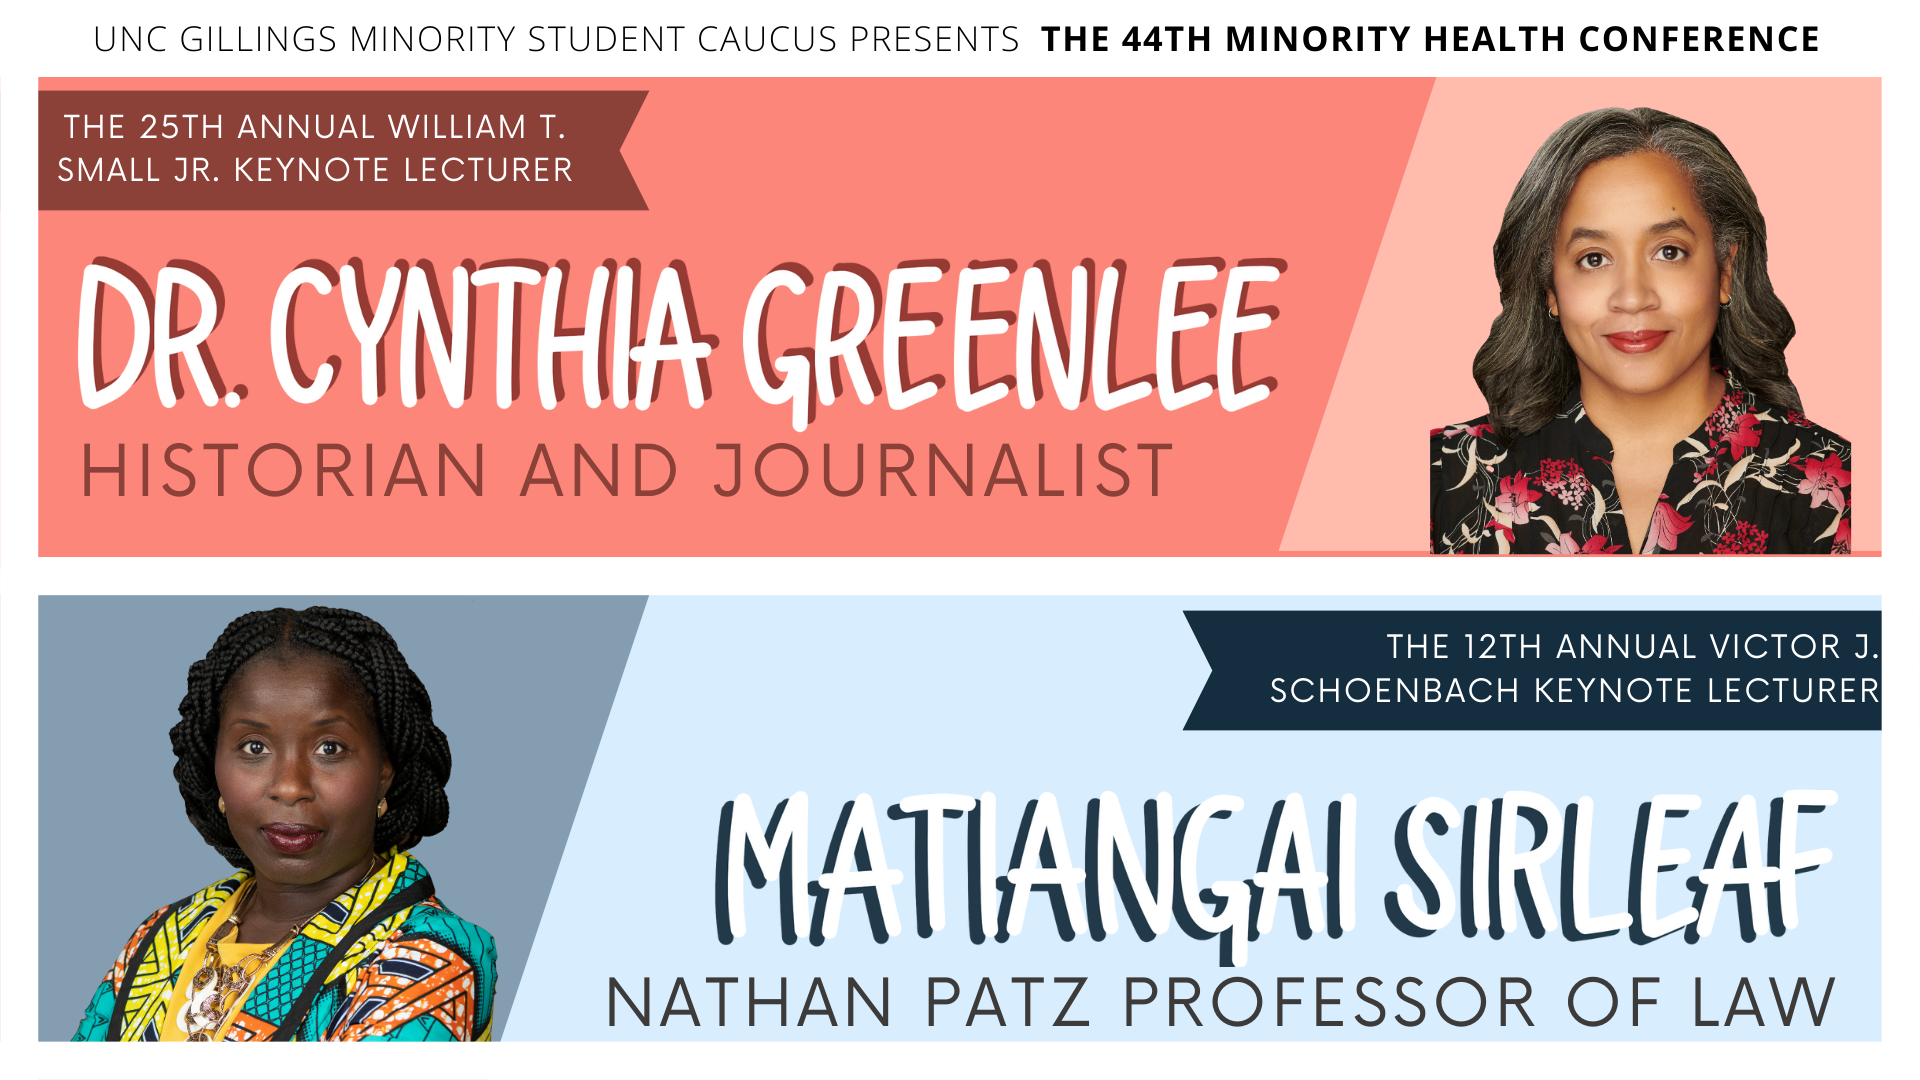 UNC Gillings Minority Student Caucus presents the 44th Minority Health Conference: Practicing Health as a Human Right. Policy, Ethics, and the Law. February 24th 2023. Register at MinorityHealth.web.unc.edu. Keynote Speakers Dr. Cynthia Greenlee, Historia